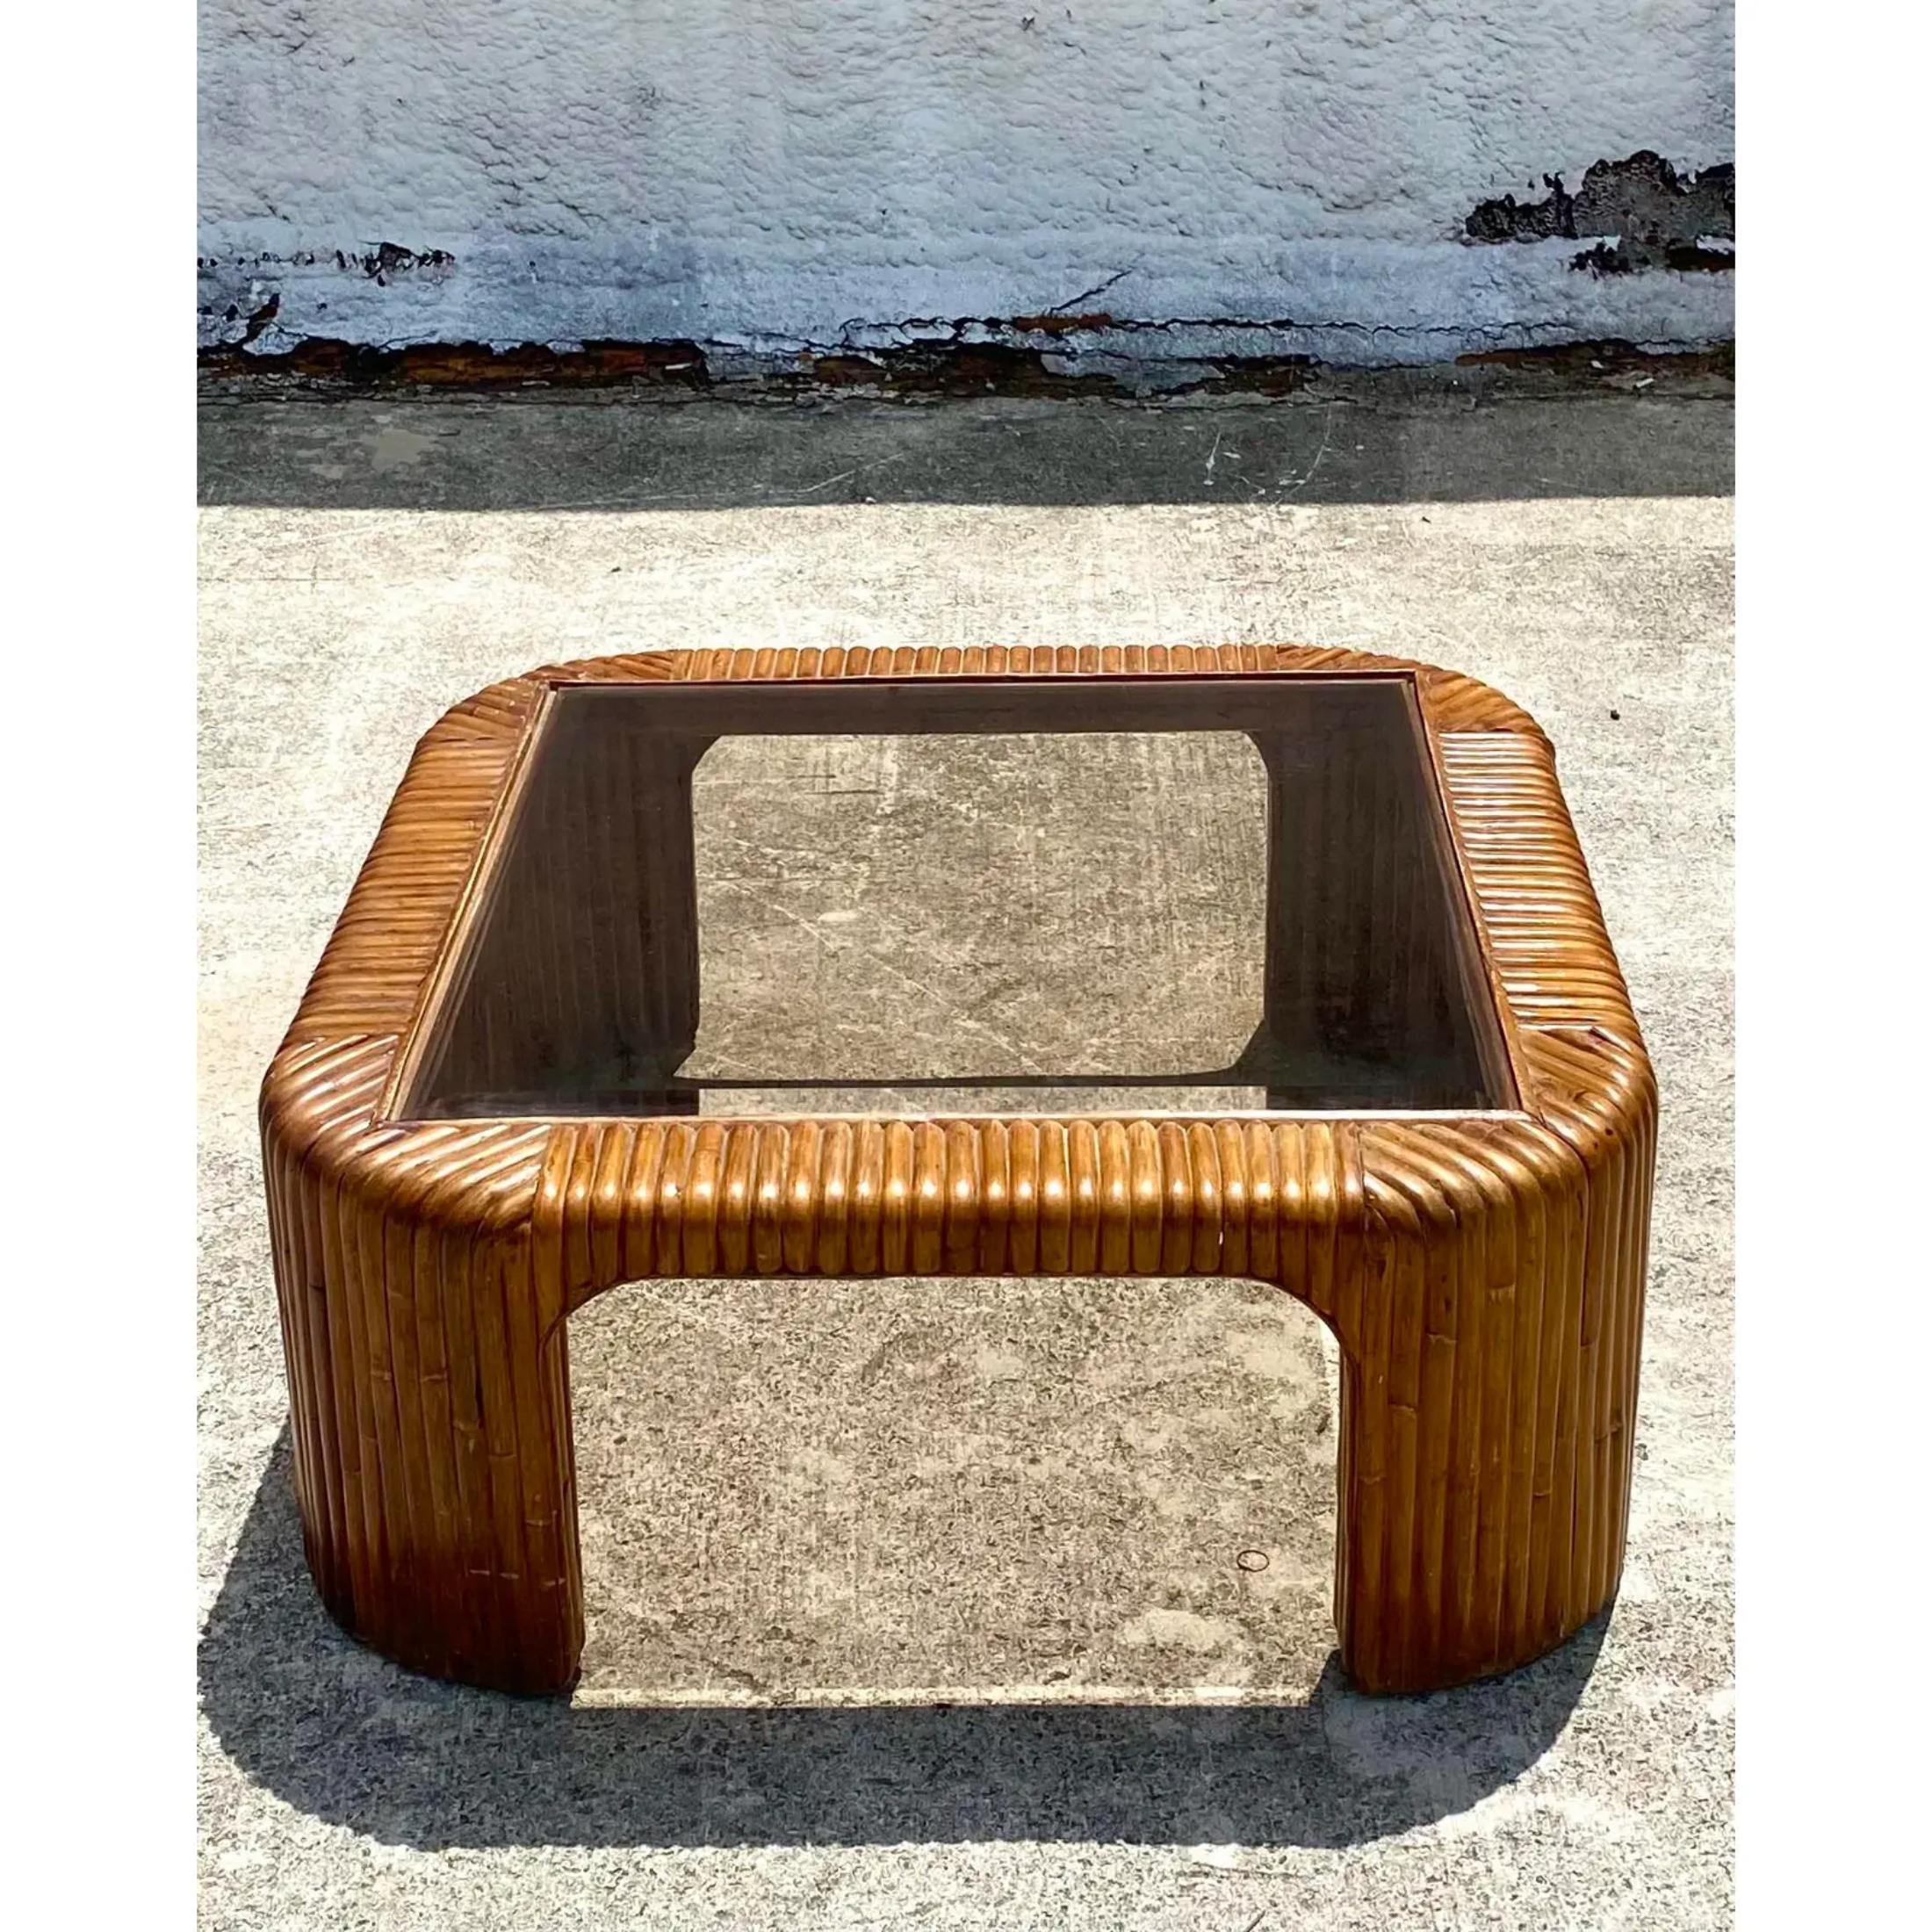 A fabulous vintage Coastal coffee table. Beautiful rich brown pretzel rattan in a beautiful waterfall design. Inset tinted glass top. Acquired from a Palm Beach estate